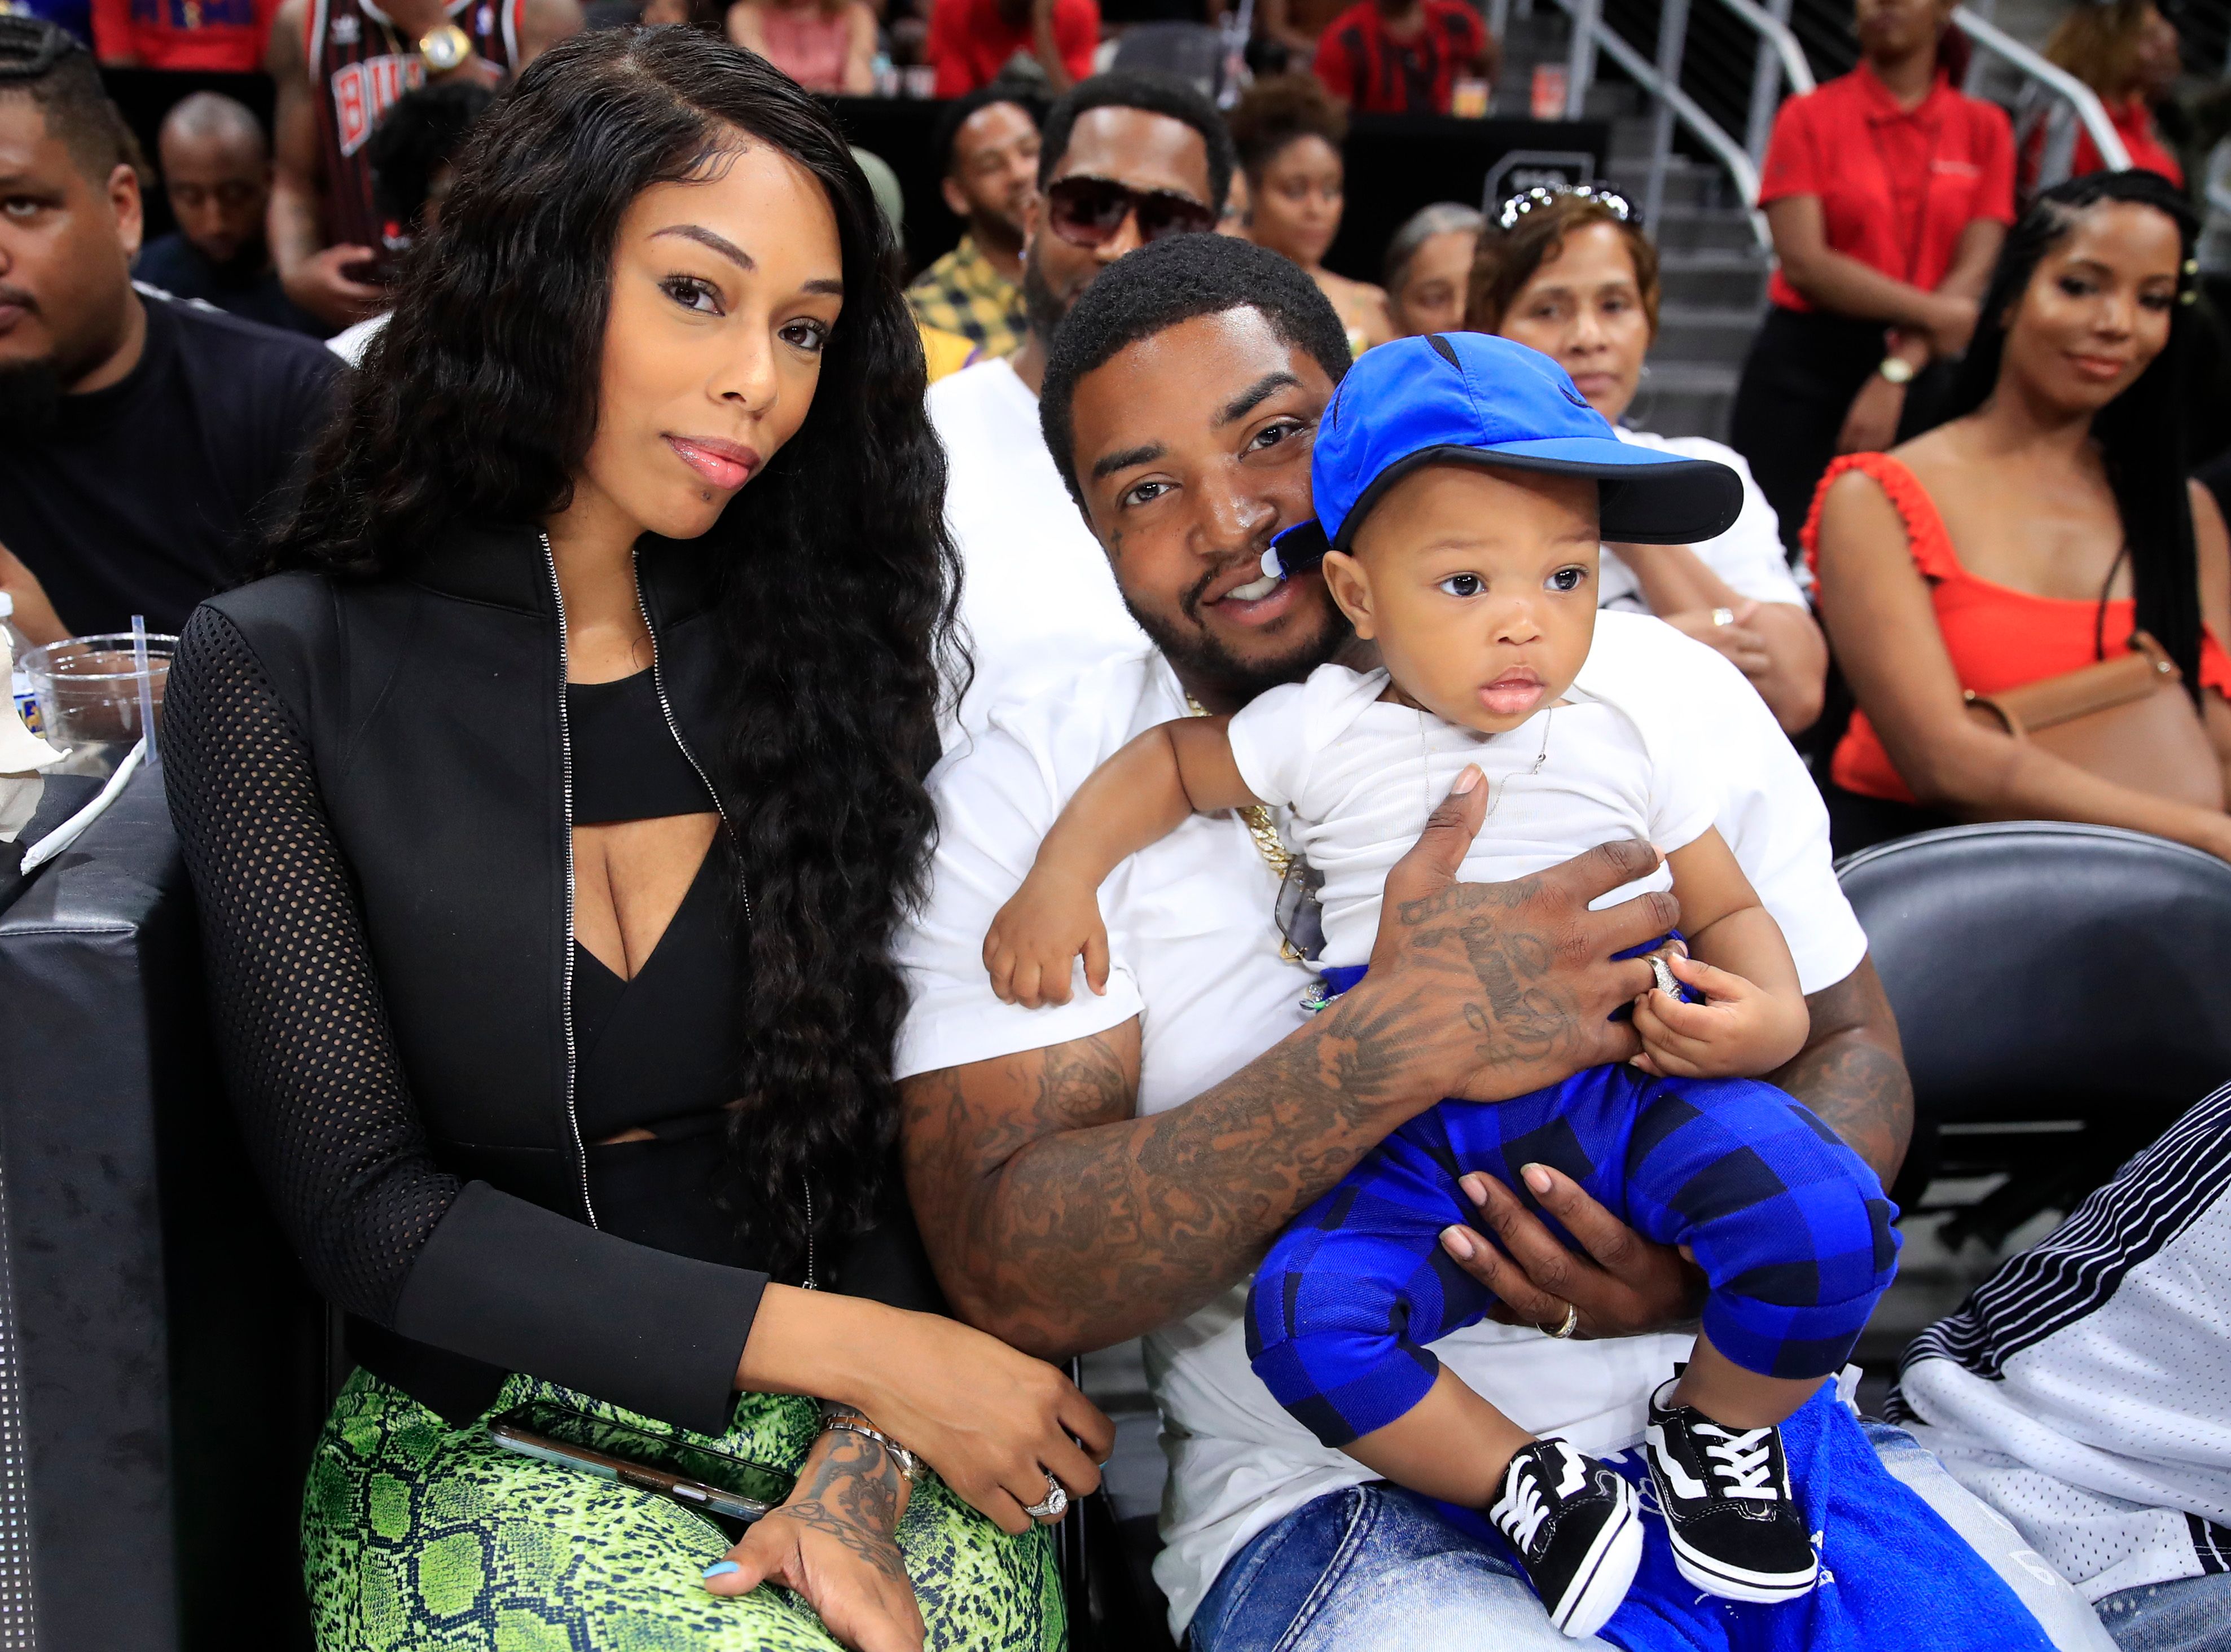 Bambi Benson, Lil Scrappy, and Breland during the game between Power and Trilogy during week three of the BIG3 three on three basketball league at State Farm Arena on July 07, 2019 in Atlanta, Georgia. | Source: Getty Images